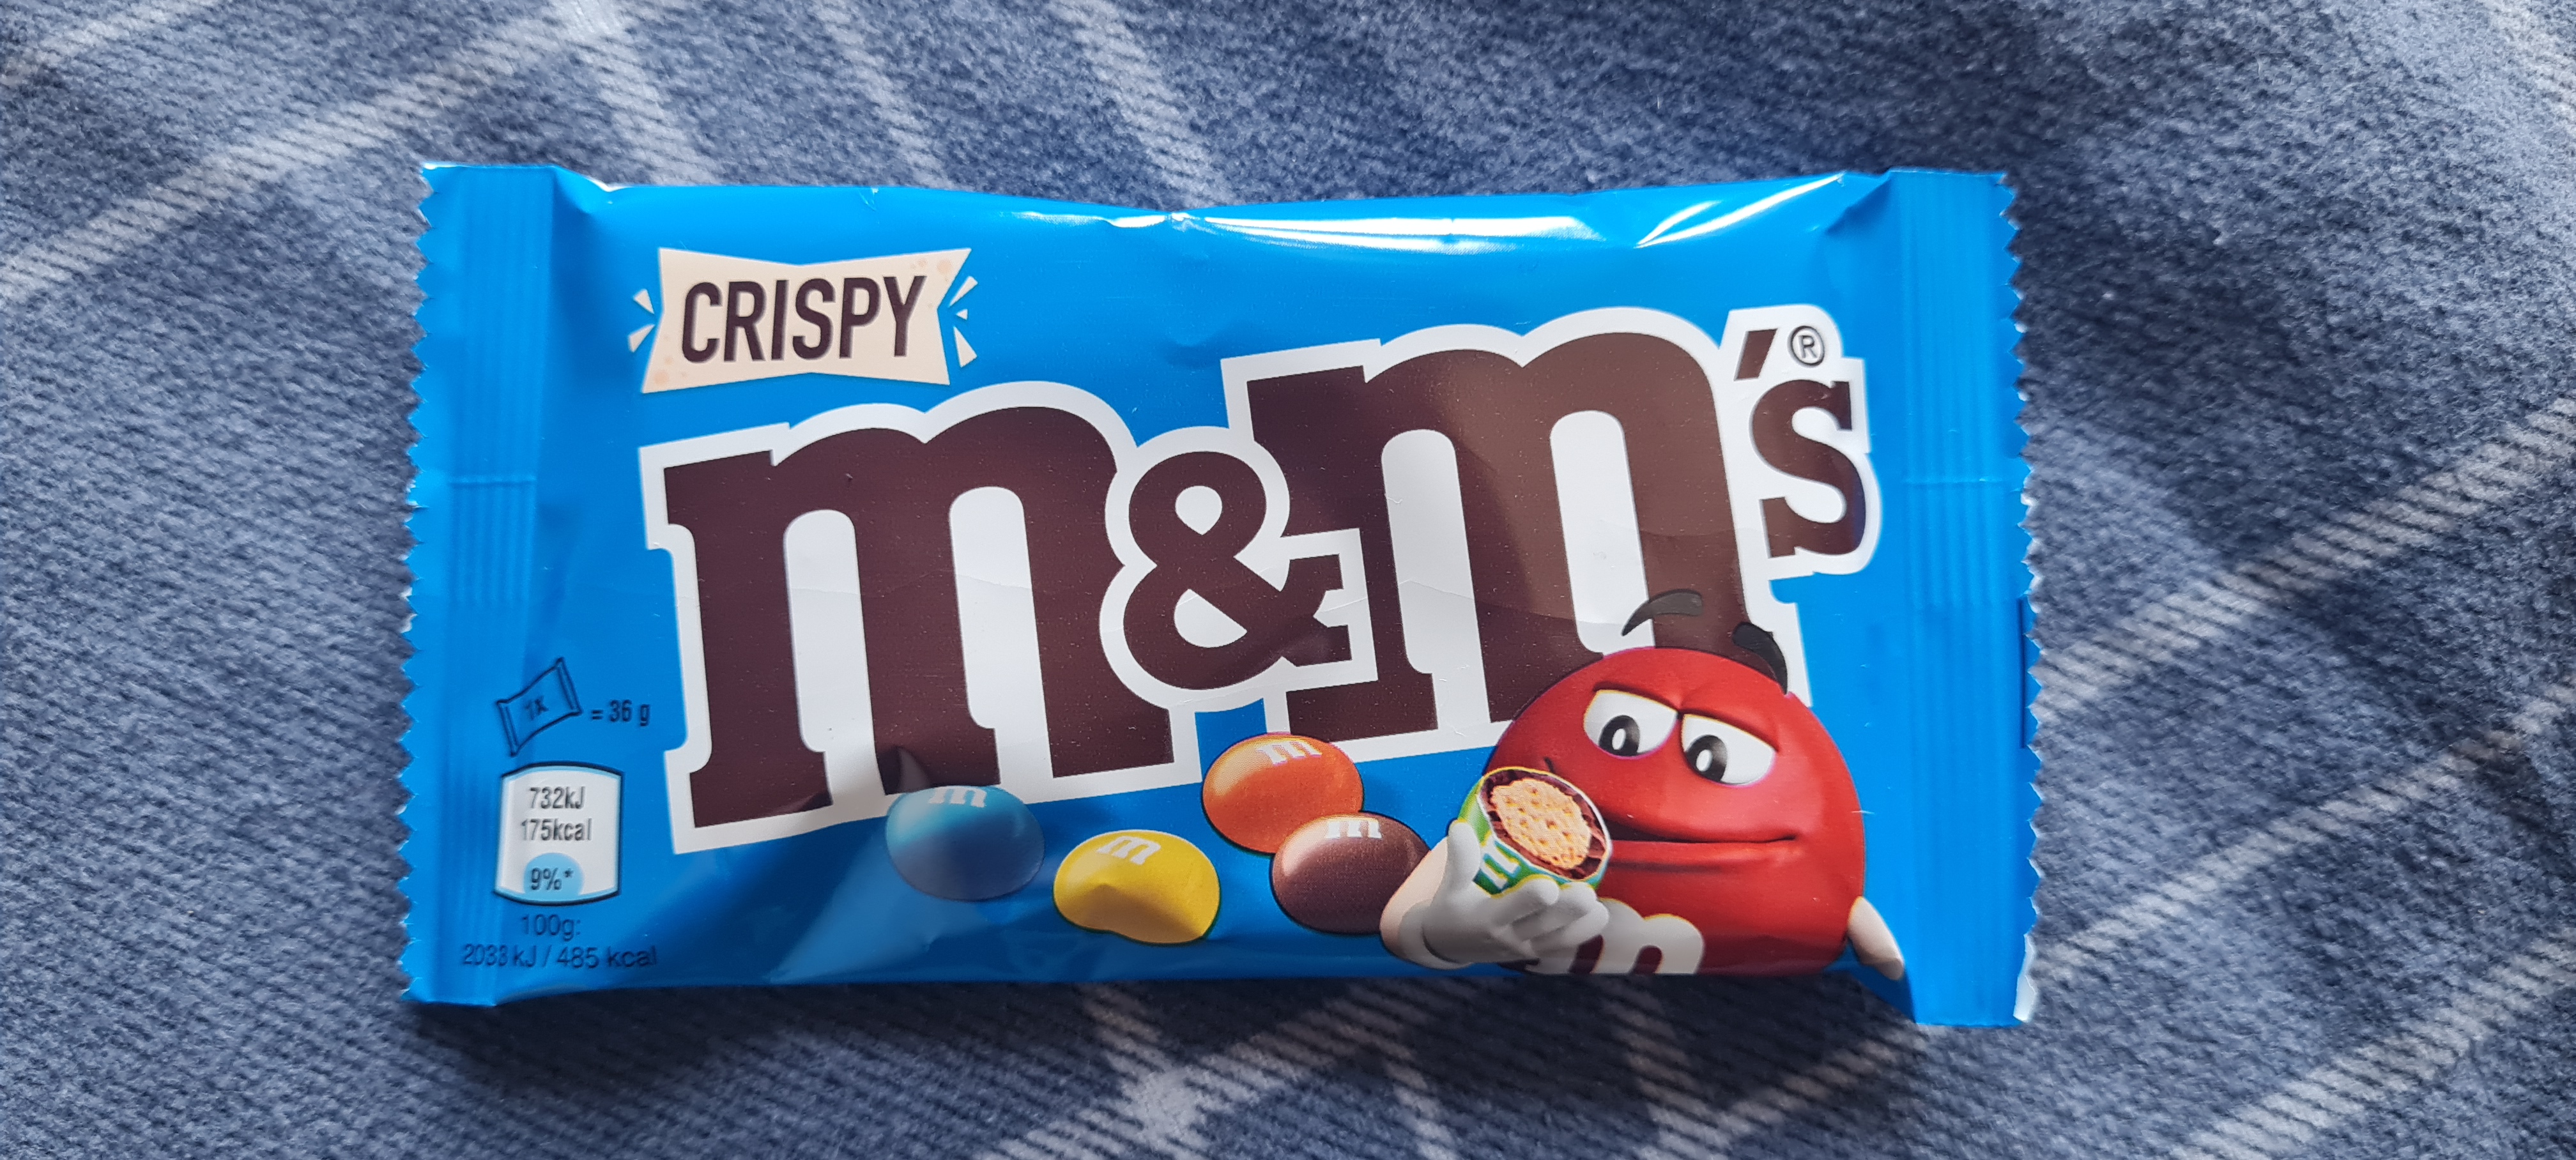 A picture of Crispy M&Ms